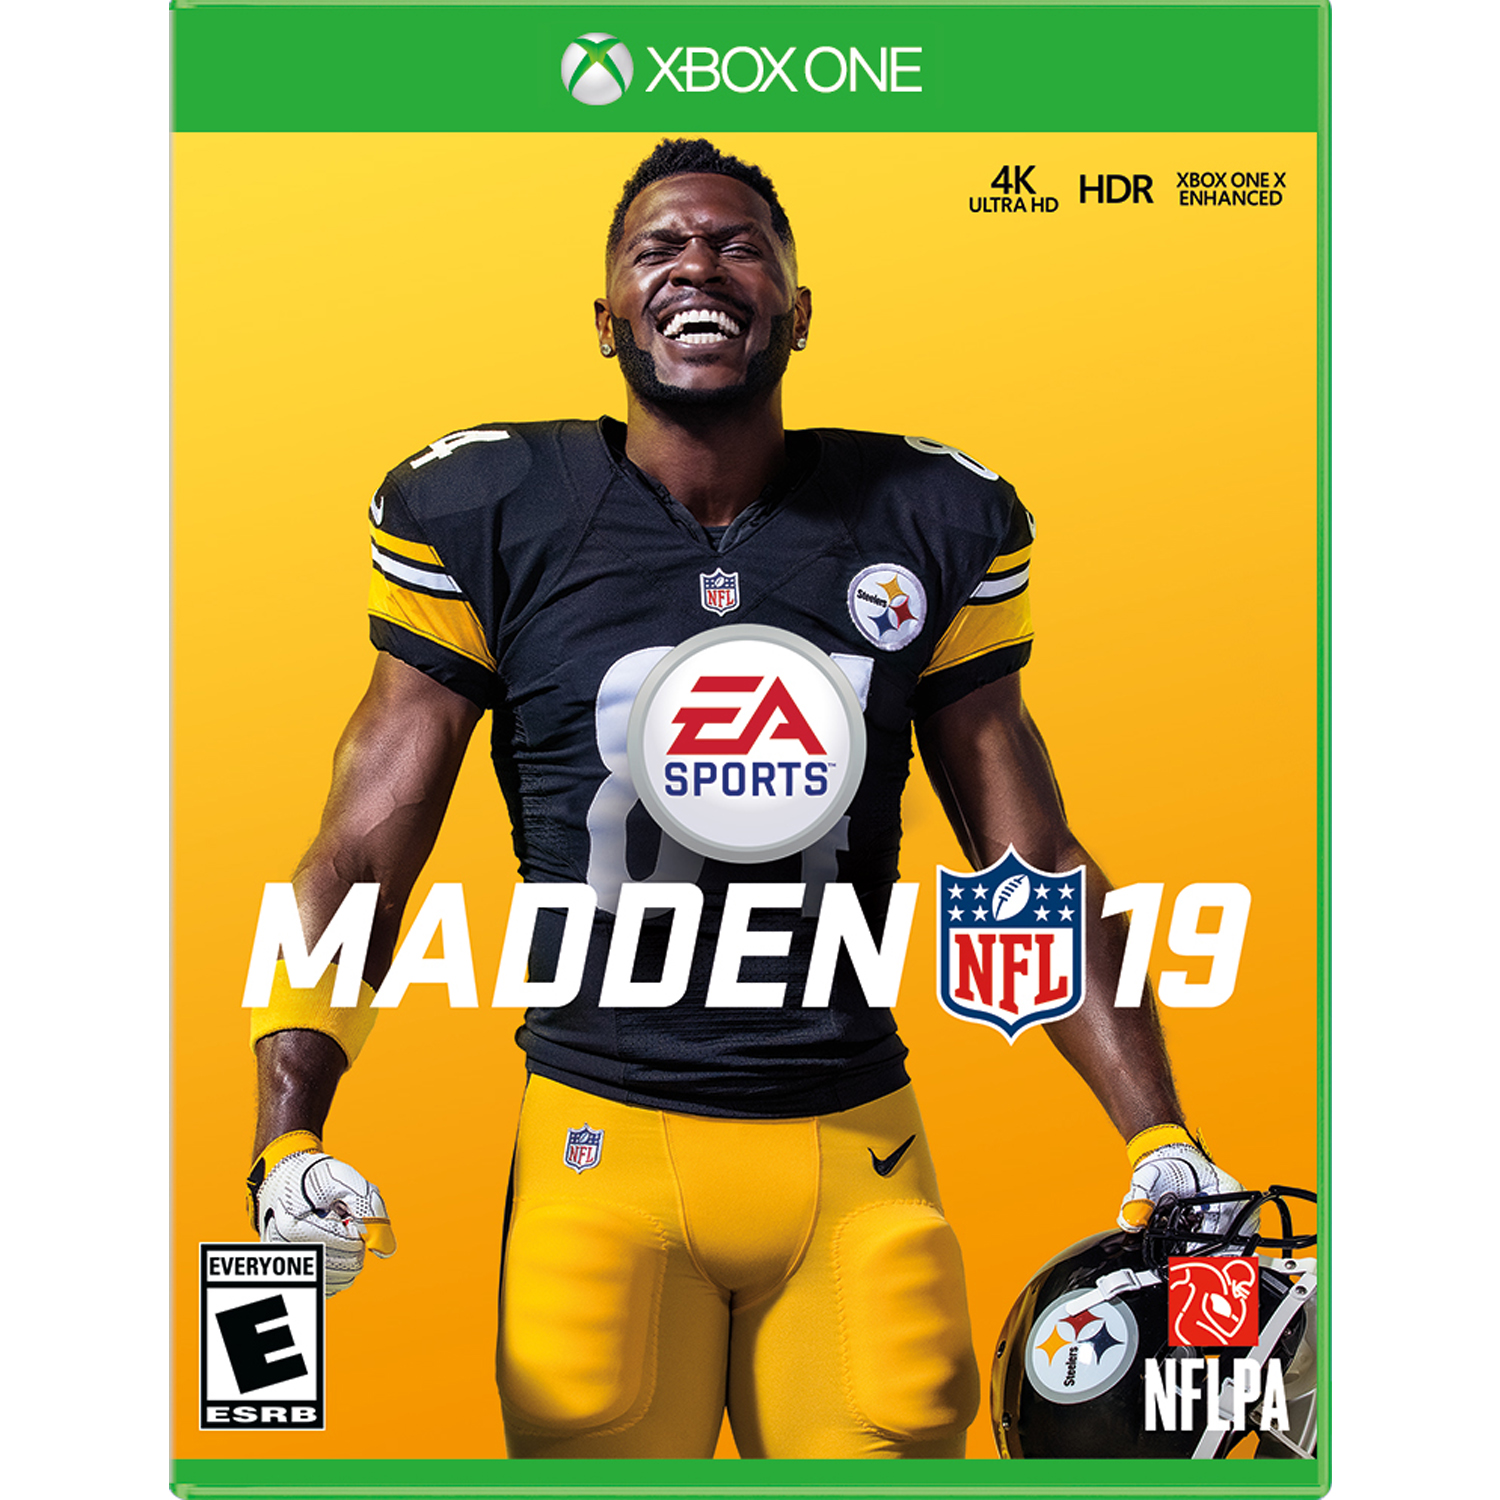 Madden NFL 19, Electronic Arts, Xbox One, [Physical], 014633371758 - image 3 of 5